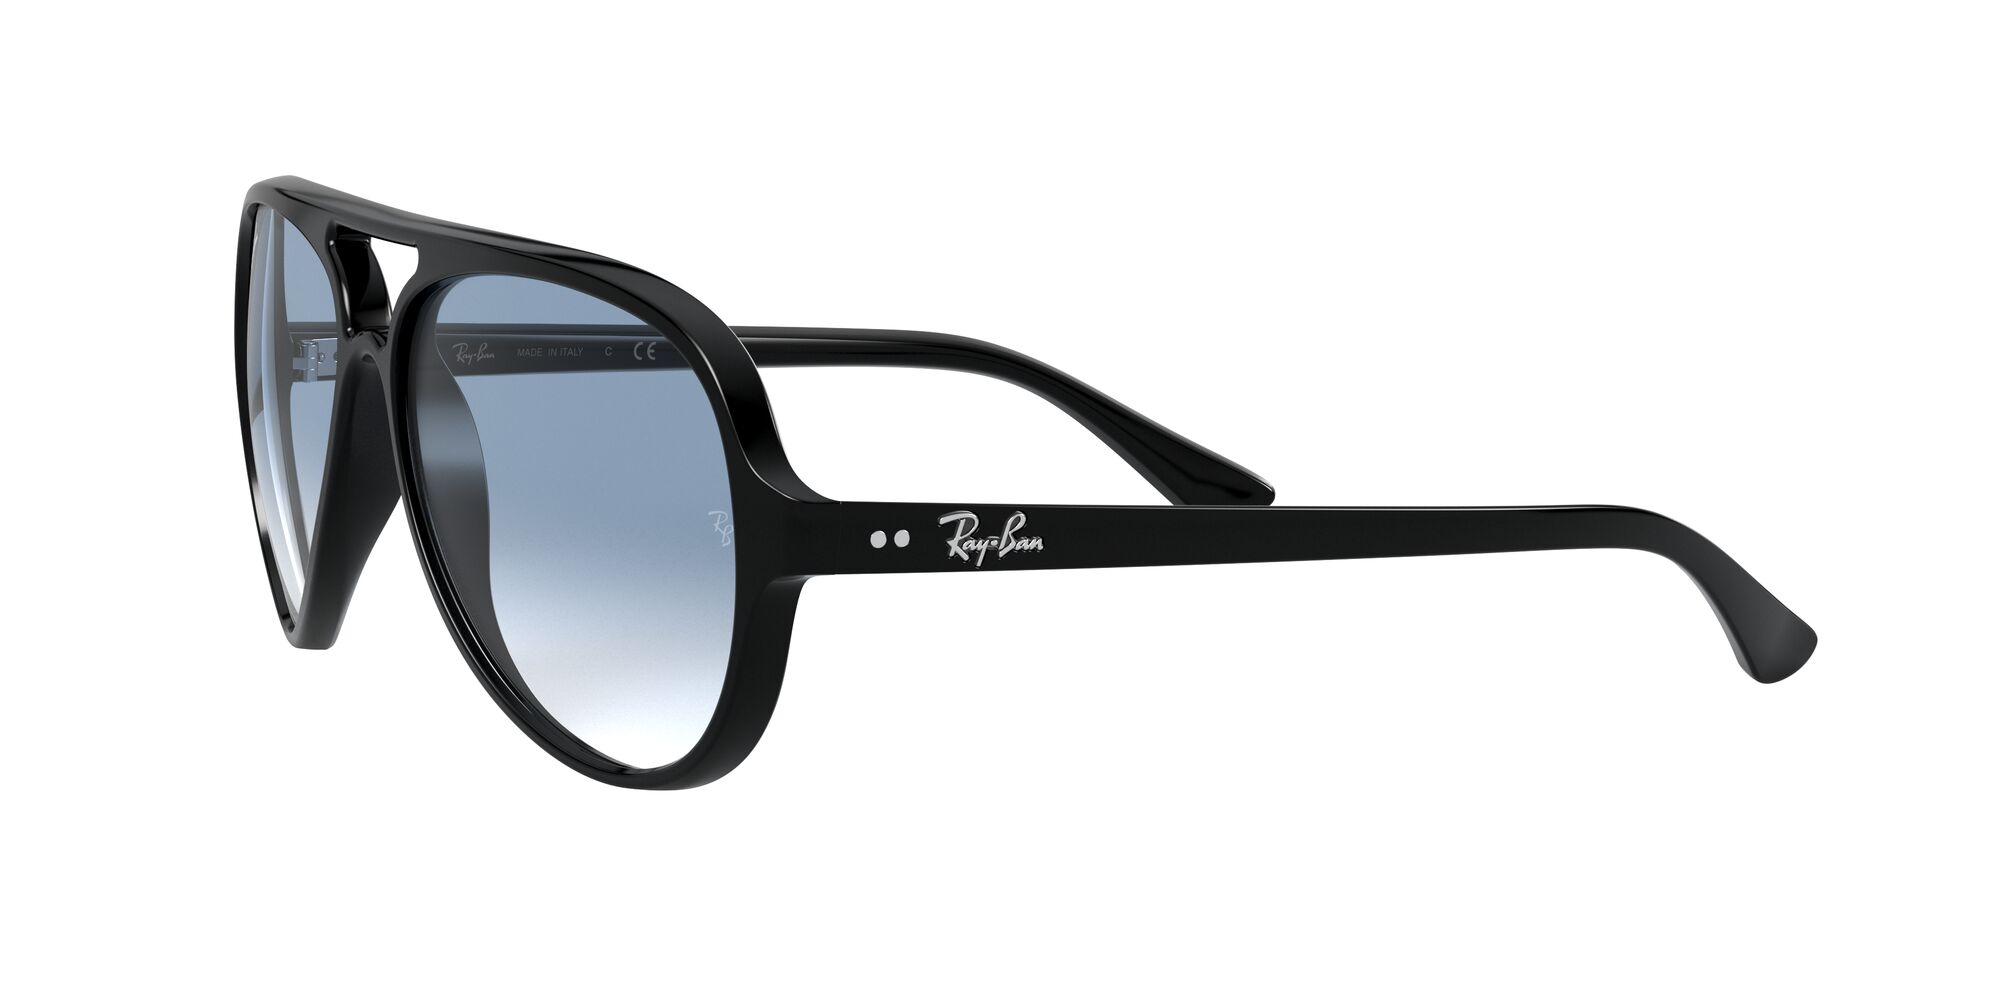 Ray-Ban RB4125 Cats 5000 Sunglasses - image 3 of 12